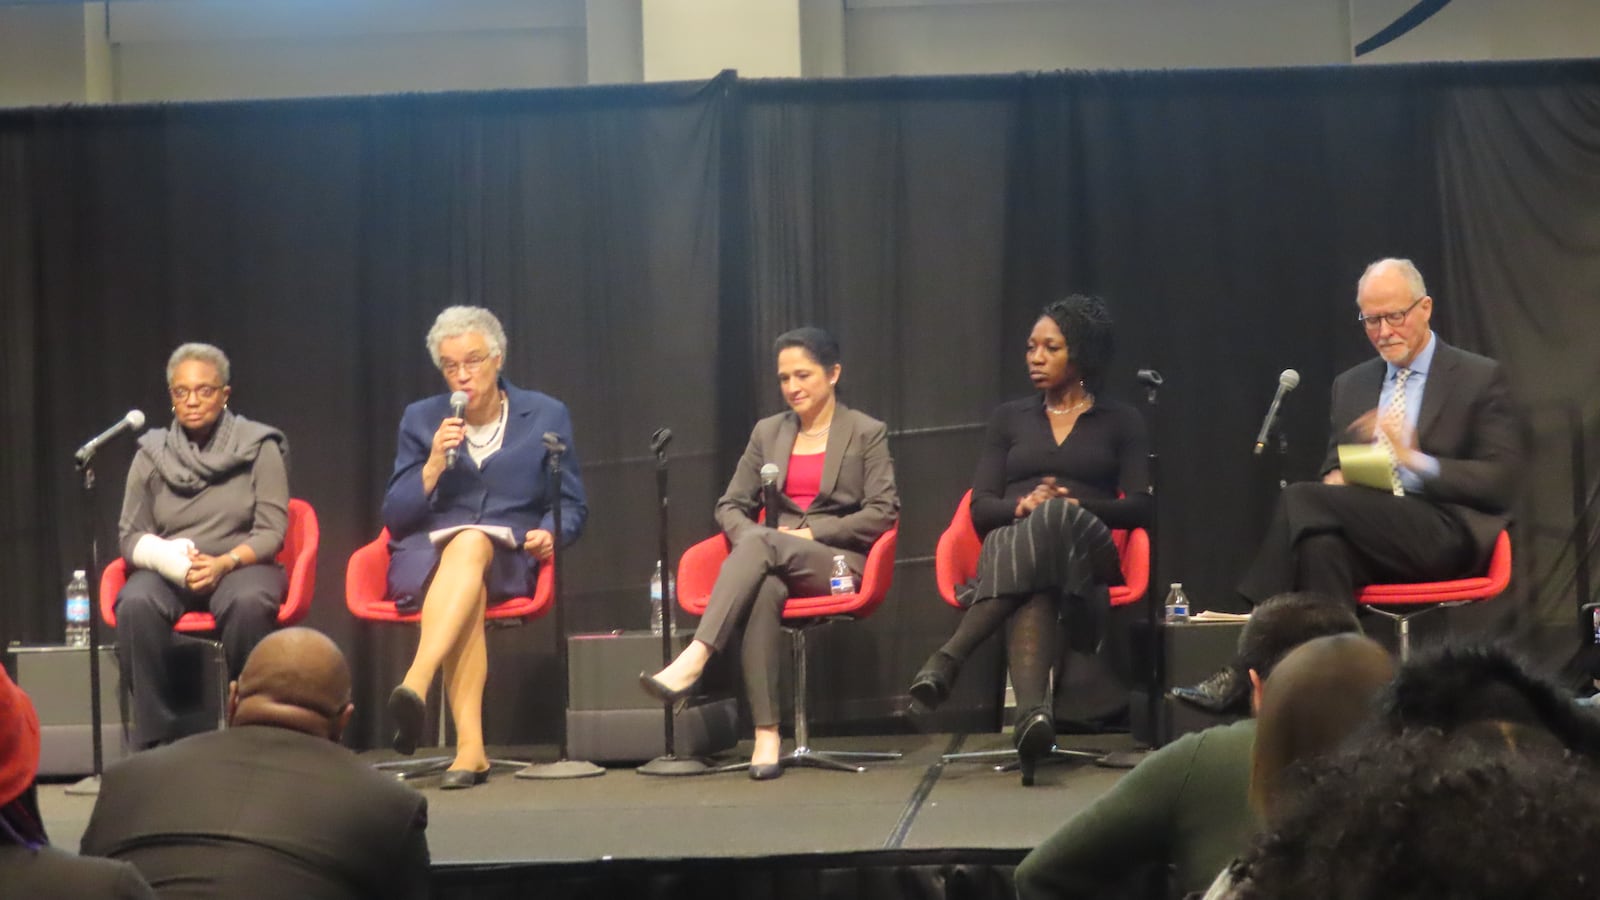 Five mayoral candidates invited to a labor forum on Nov. 19, 2018, discussed the exodus of black families from Chicago.